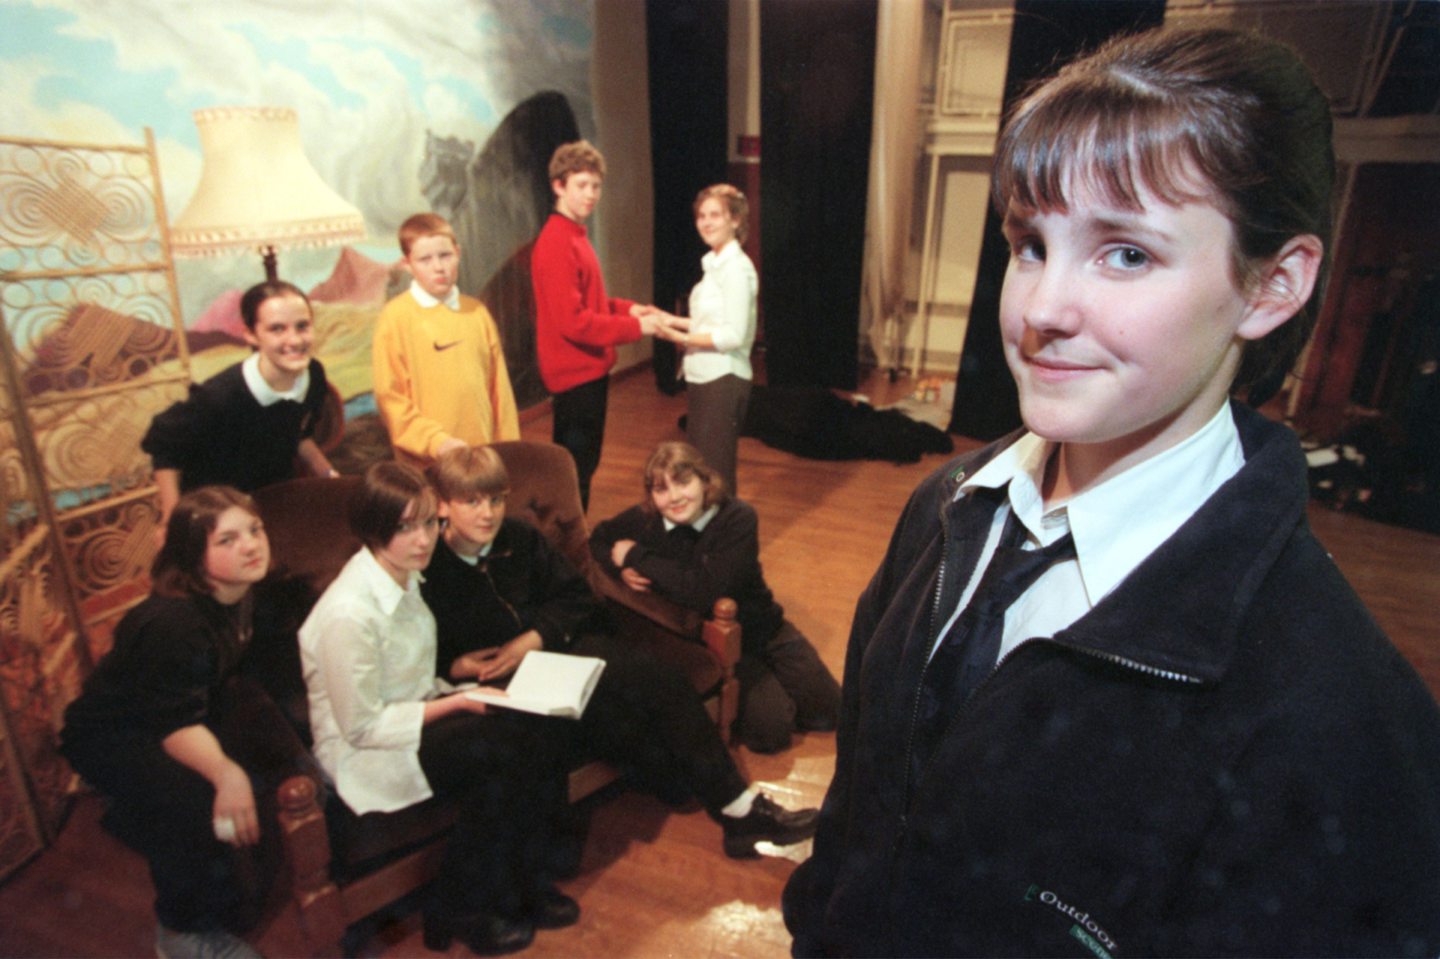 Inverurie Academy pupils posing for photos for a play they were performing